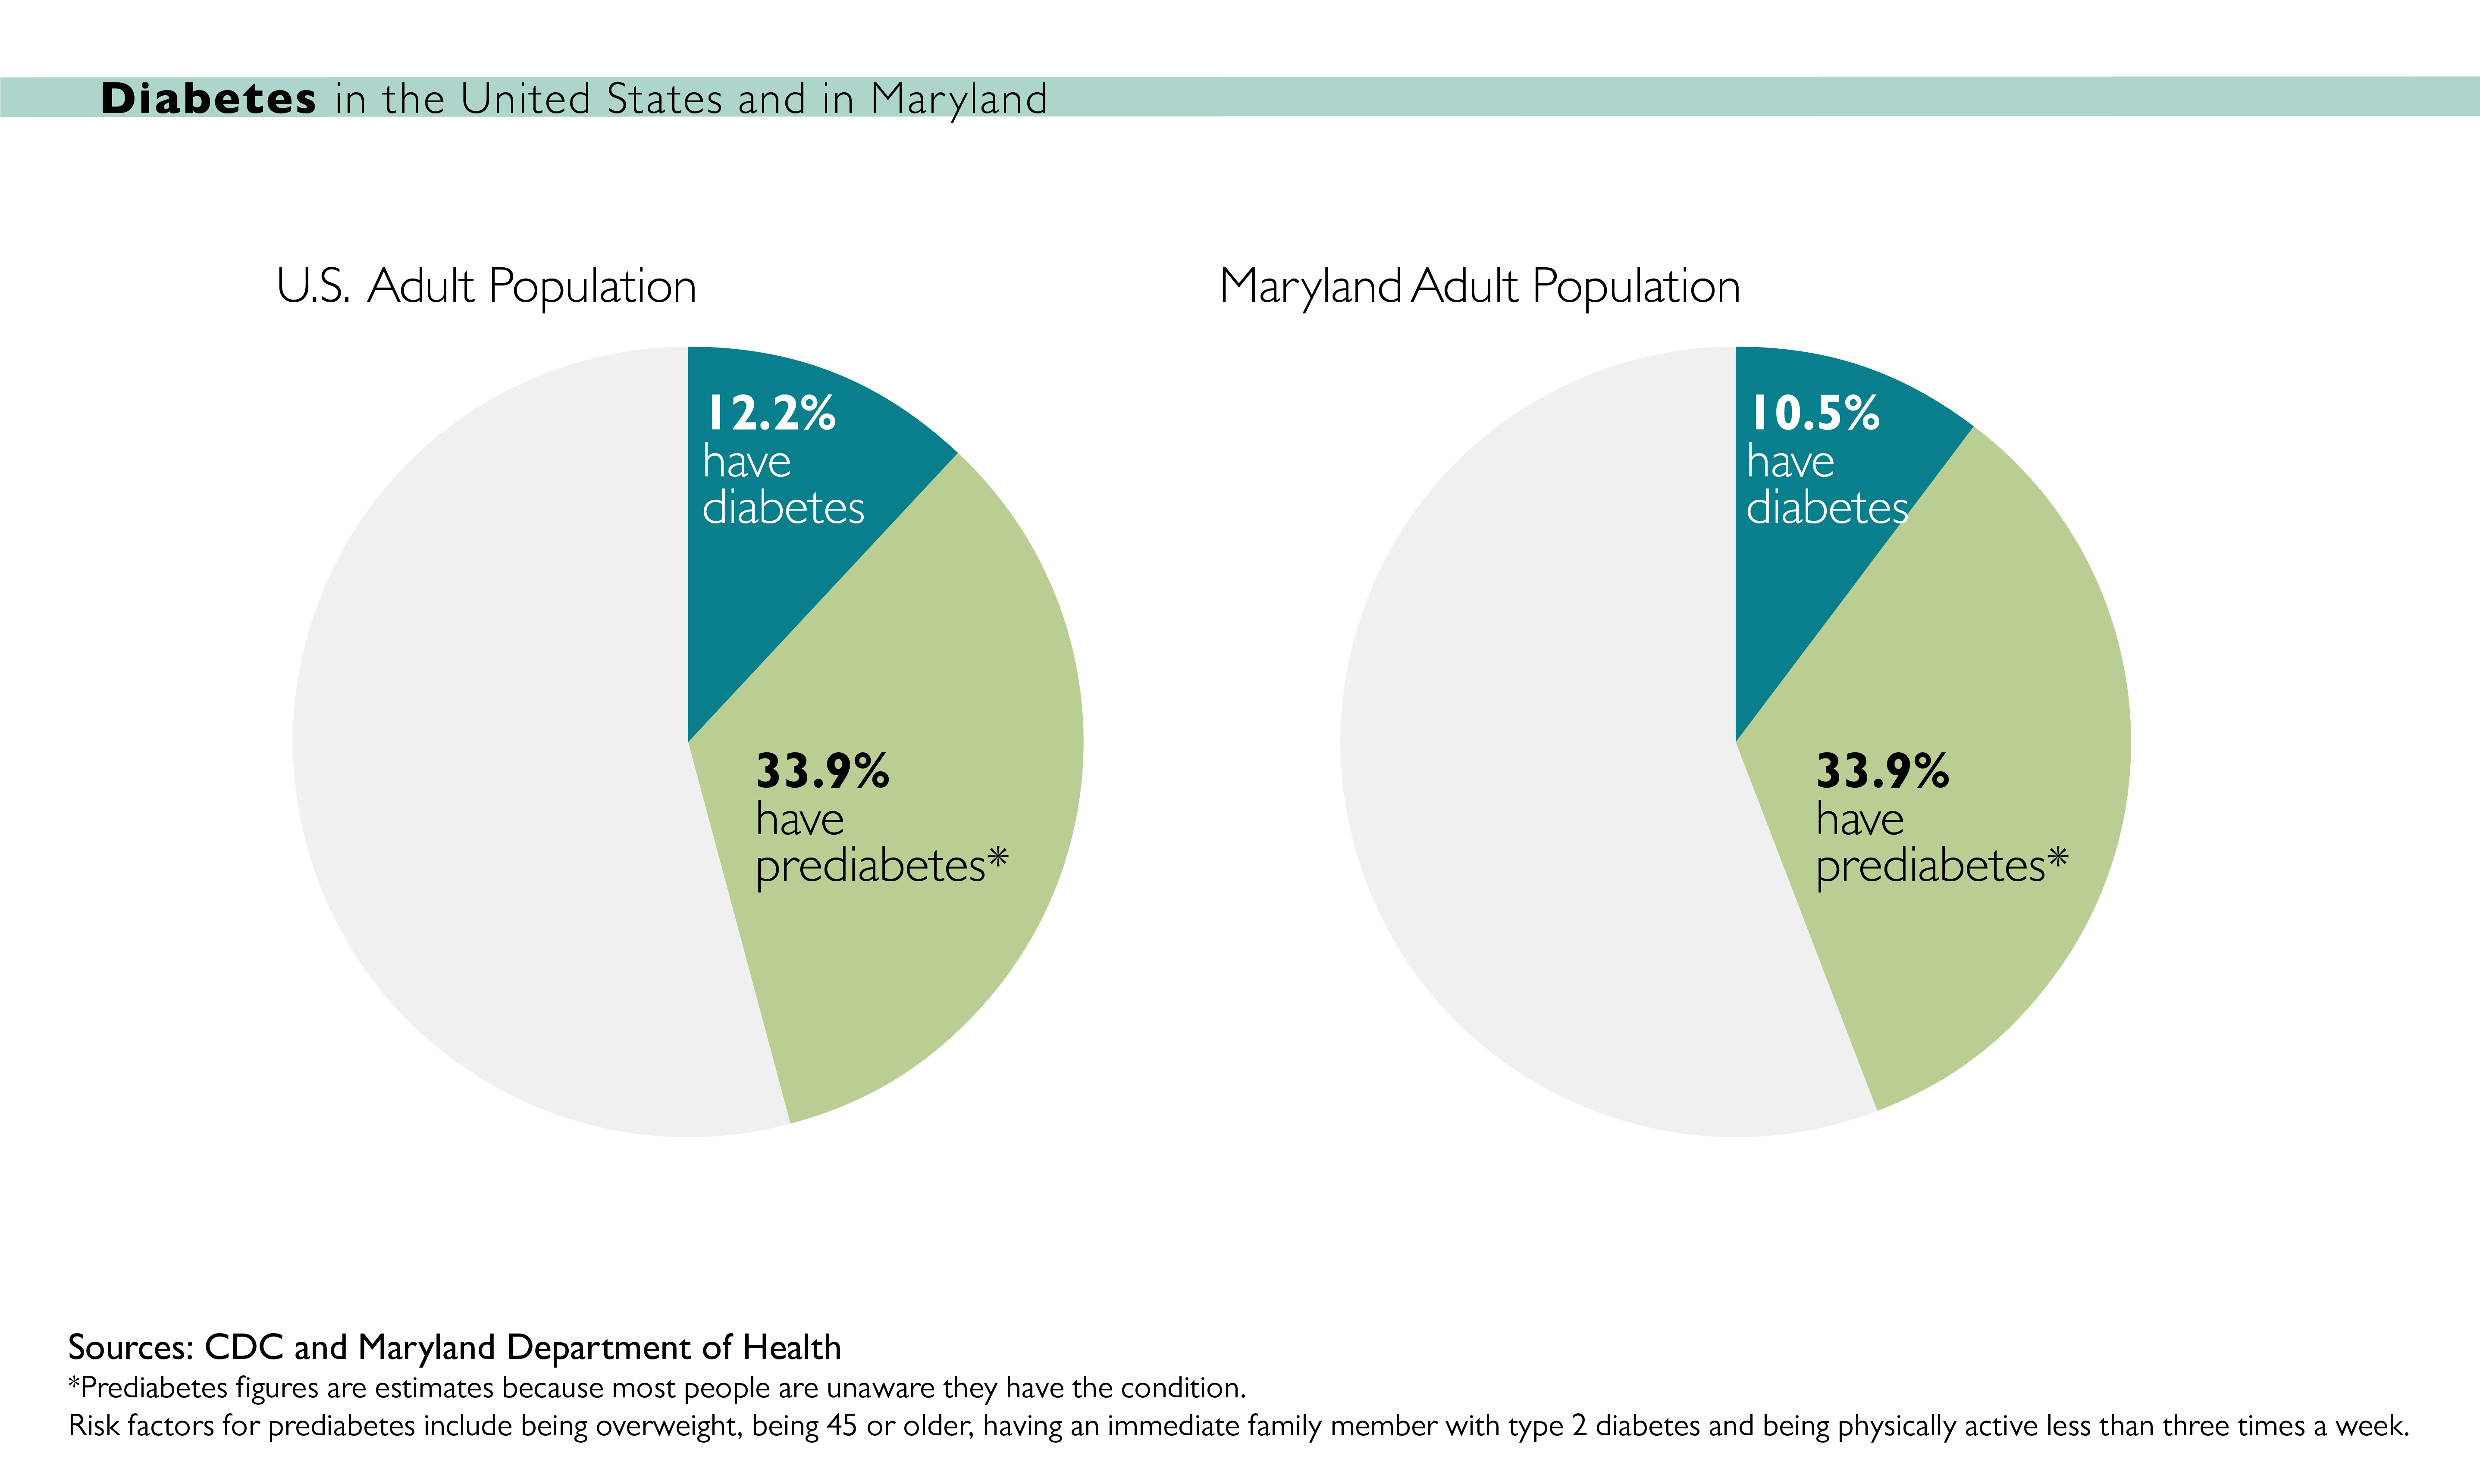 Diabetes in the U.S. and Maryland